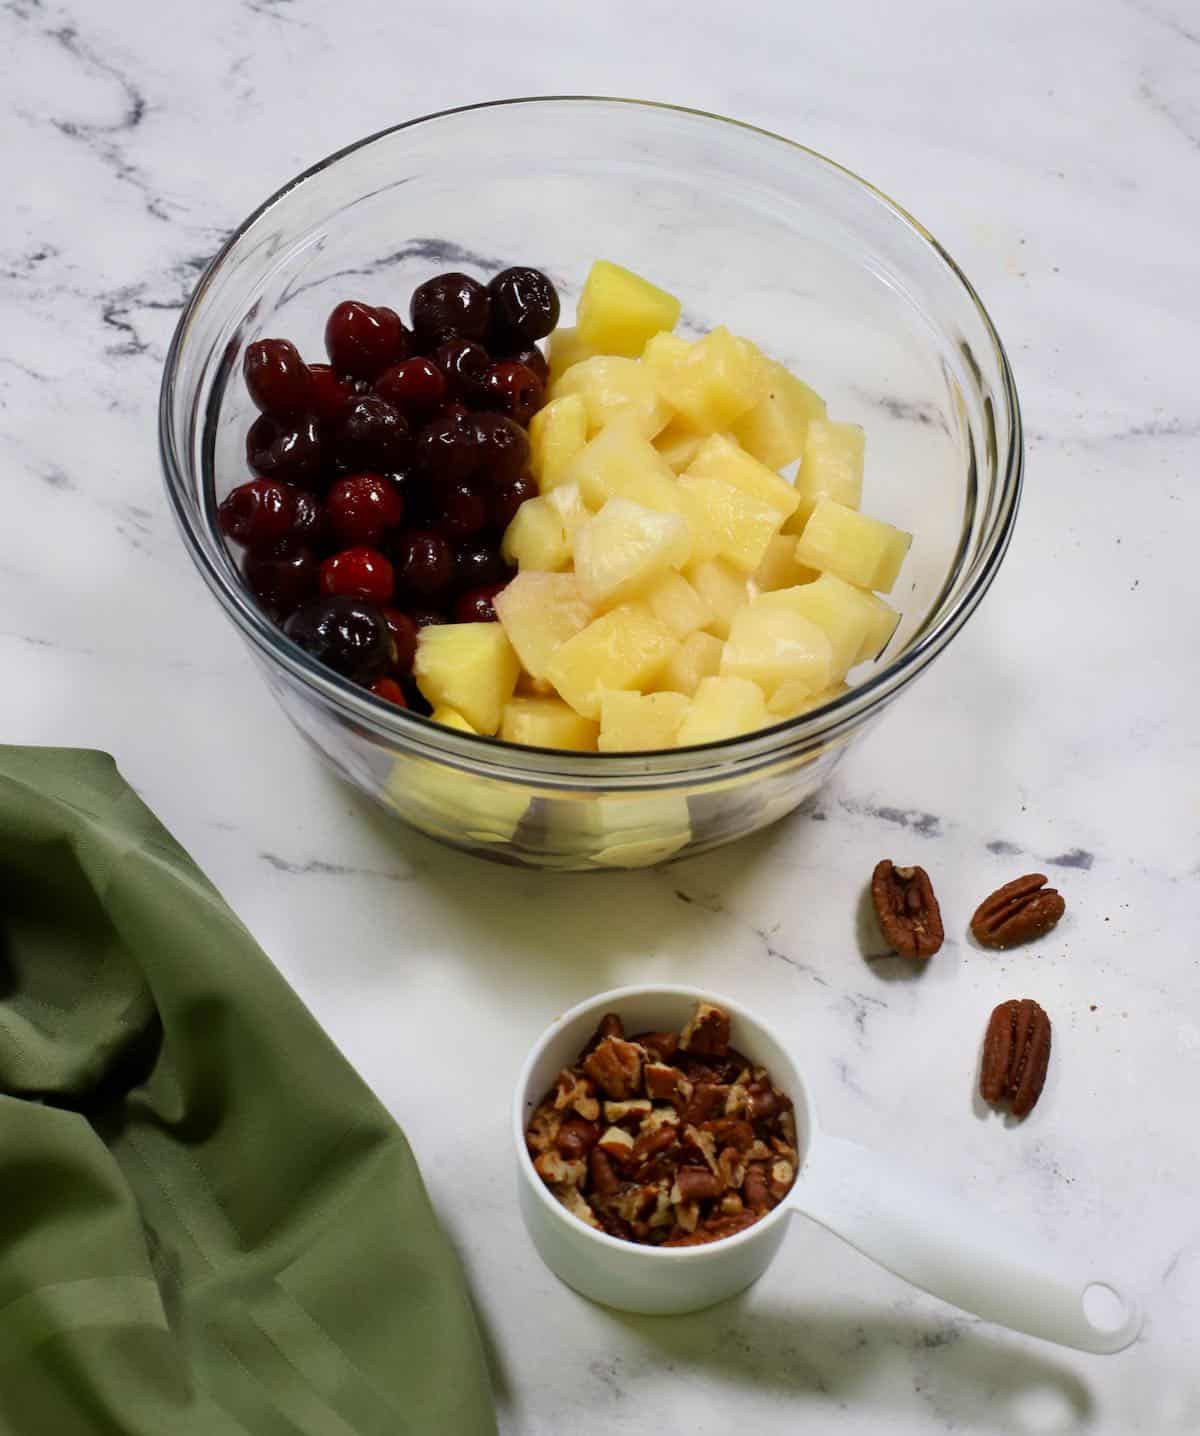 Cherries and pineapple chunks in a glass bowl.